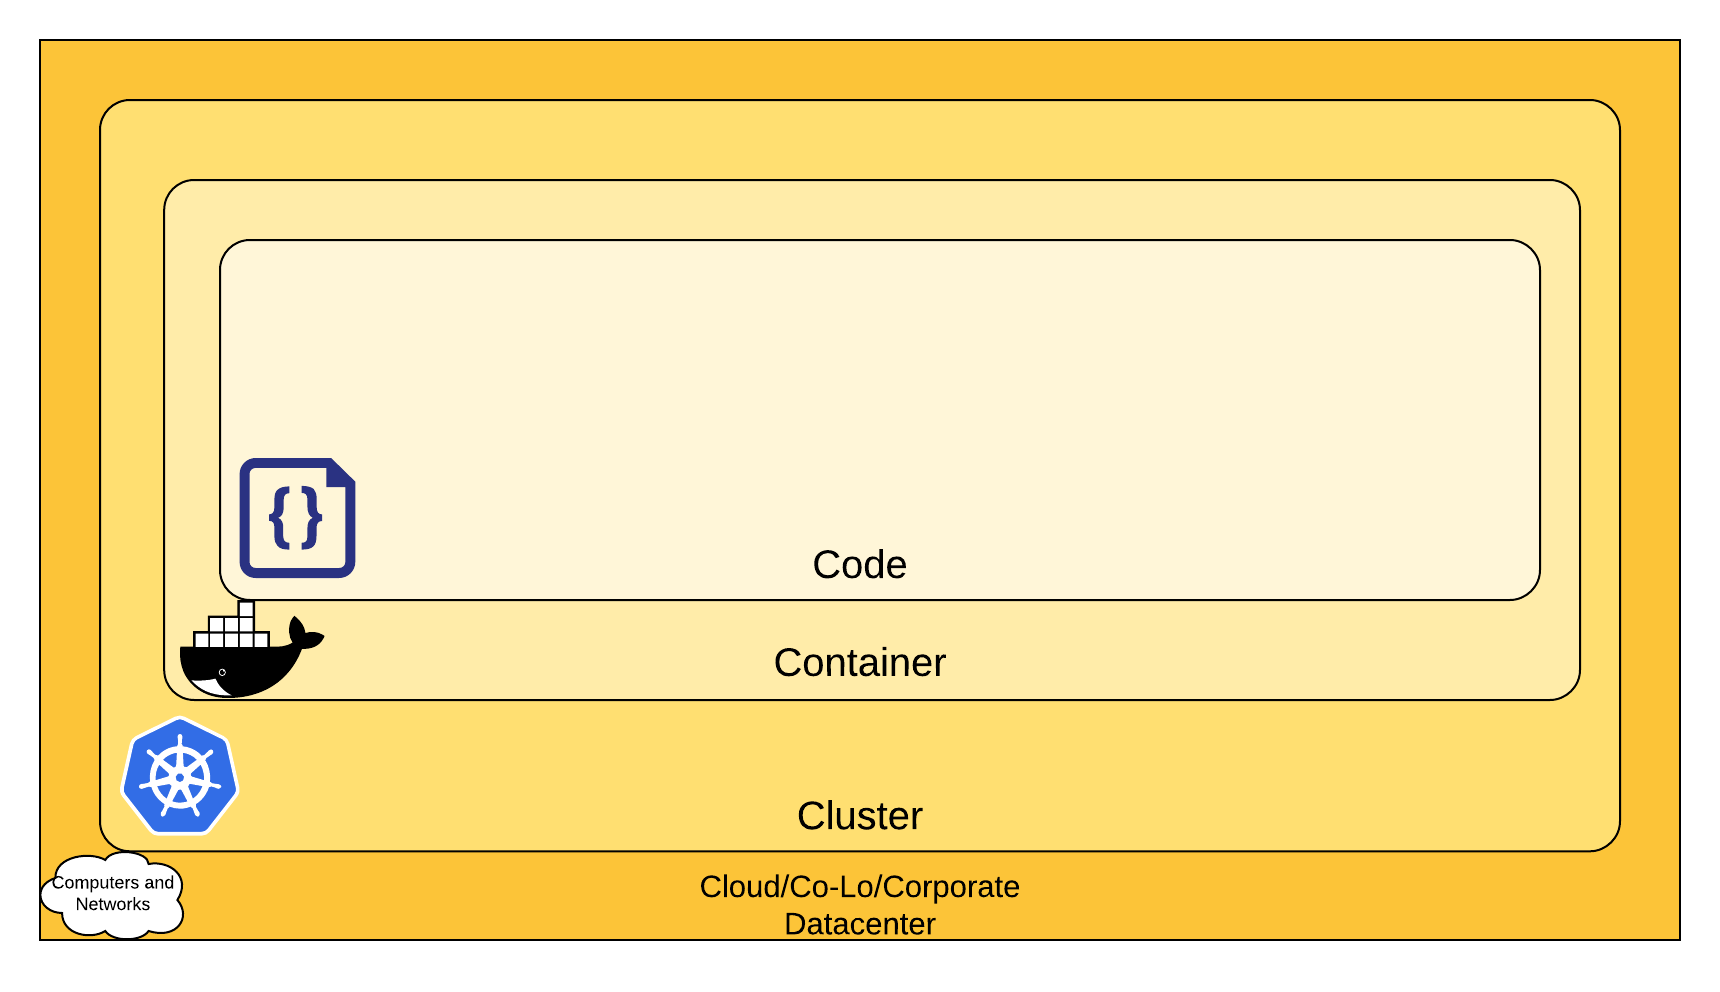 Cloud, Clusters, Containers, and Code